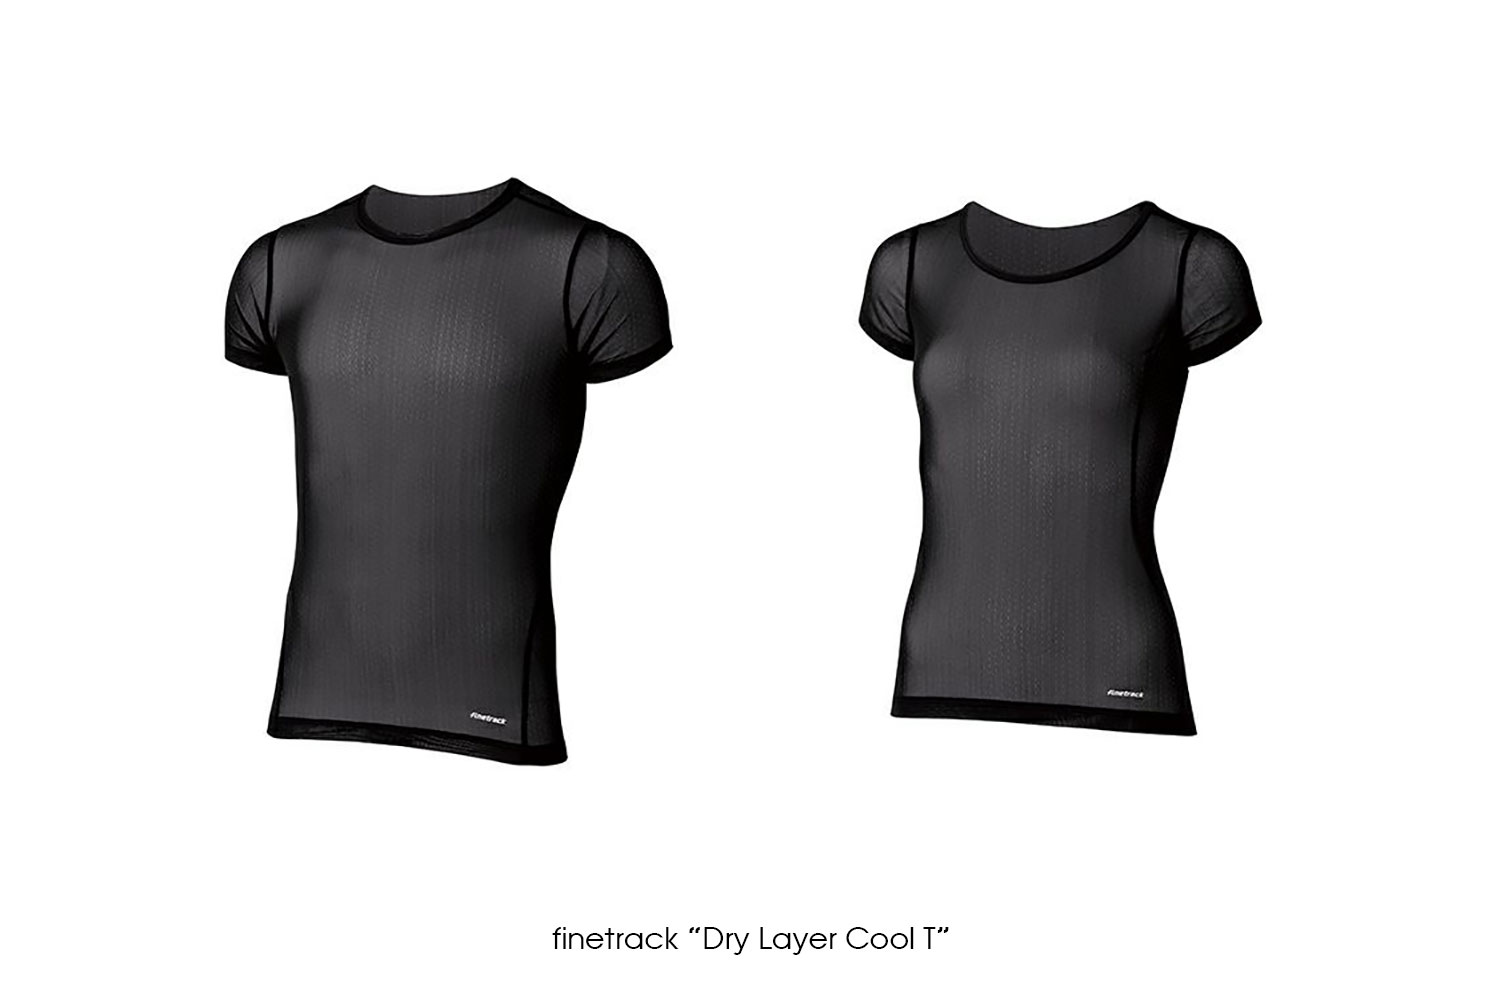 finetrack "Dry Layer Cool T"